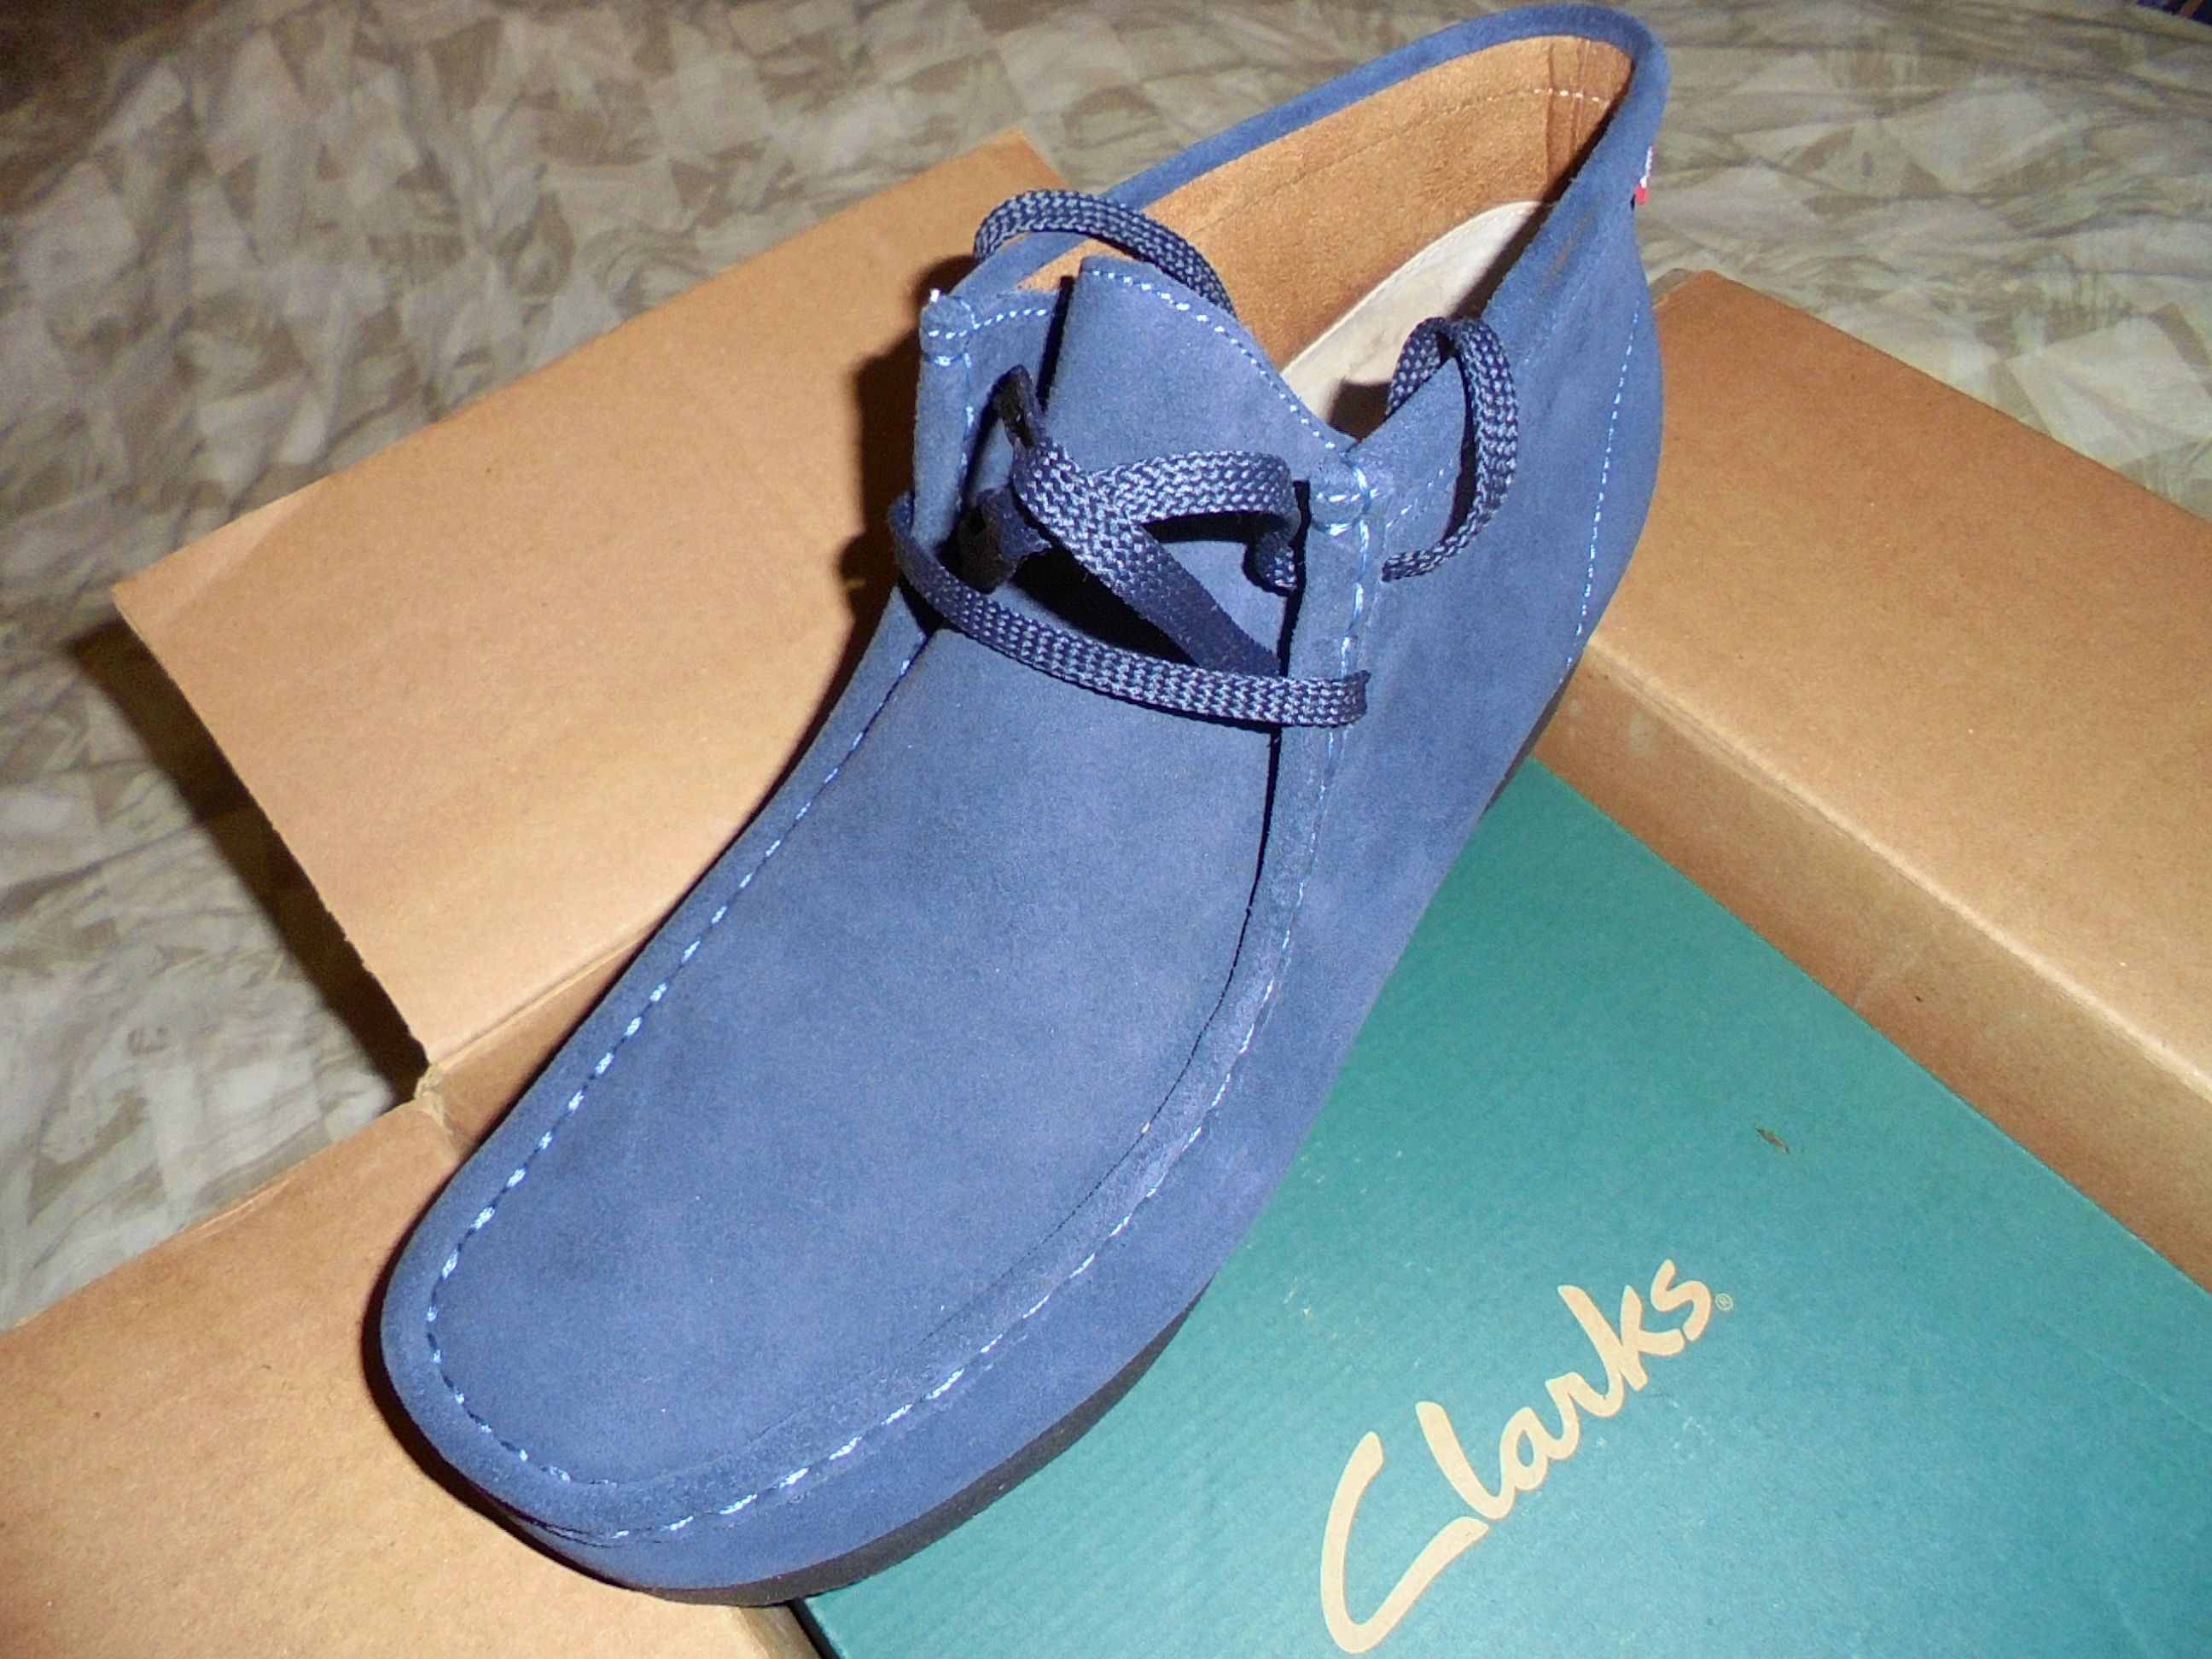 #WallabeePadmores #frontandcenter by #Clarks - www.drewrynewsnetwork.com/forum/reviews